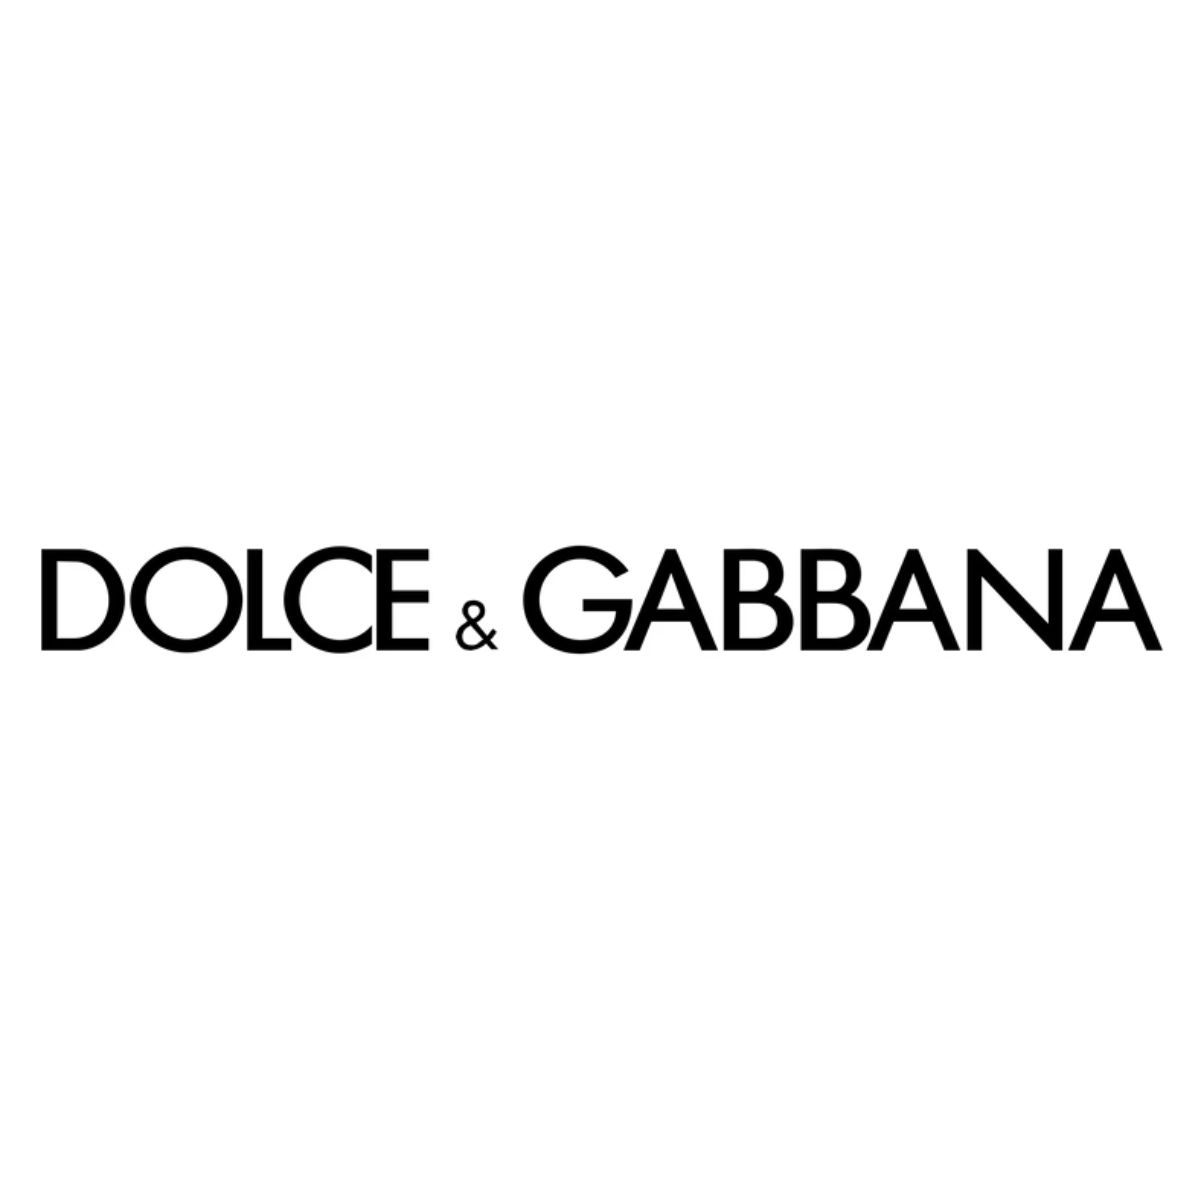 "Dolce & Gabbana stylish sunglasses and optical frames for men and women available at Optorium, featuring free shipping on all orders."